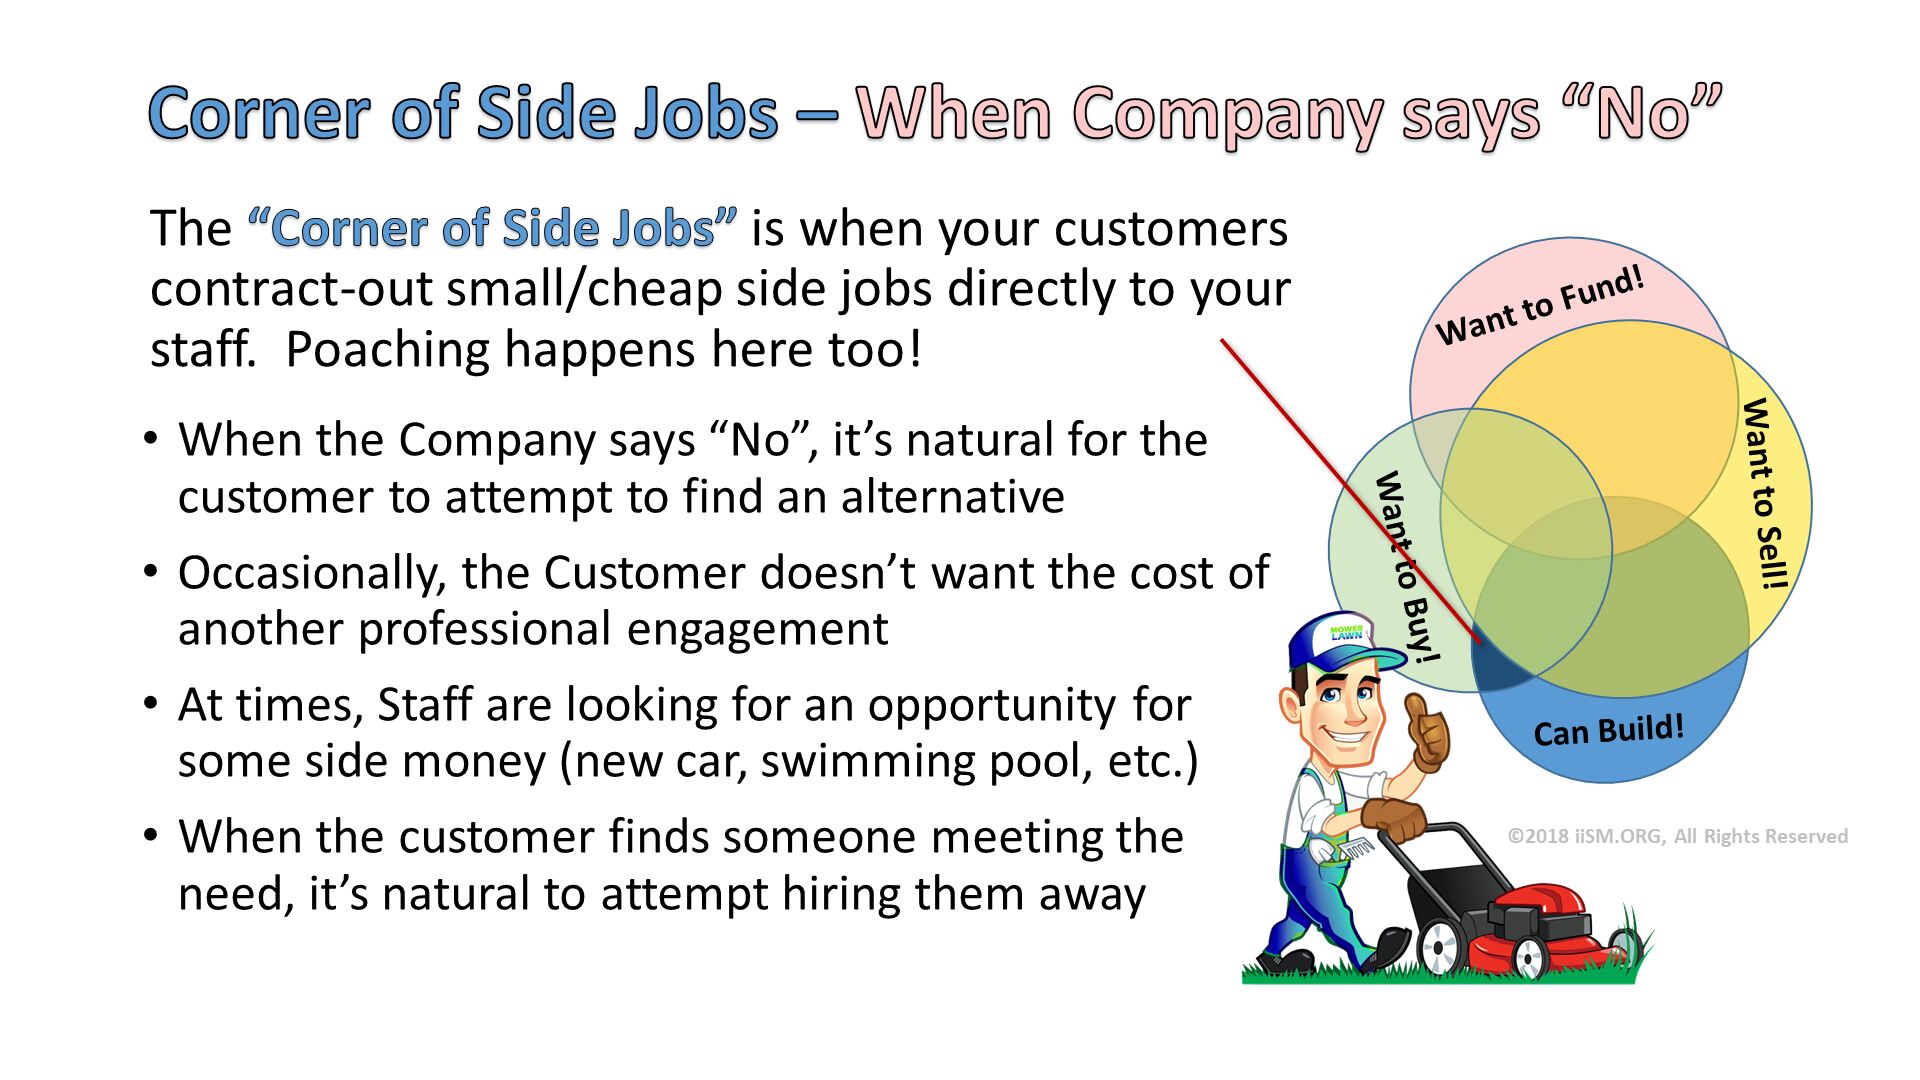 Corner of Side Jobs – When Company says “No”. Can Build!. Want to Sell!. Want to Buy!. Want to Fund!. The “Corner of Side Jobs” is when your customers contract-out small/cheap side jobs directly to your staff.  Poaching happens here too!
. When the Company says “No”, it’s natural for the customer to attempt to find an alternative
Occasionally, the Customer doesn’t want the cost of another professional engagement
At times, Staff are looking for an opportunity for some side money (new car, swimming pool, etc.)
When the customer finds someone meeting the need, it’s natural to attempt hiring them away
. ©2018 iiSM.ORG, All Rights Reserved. 